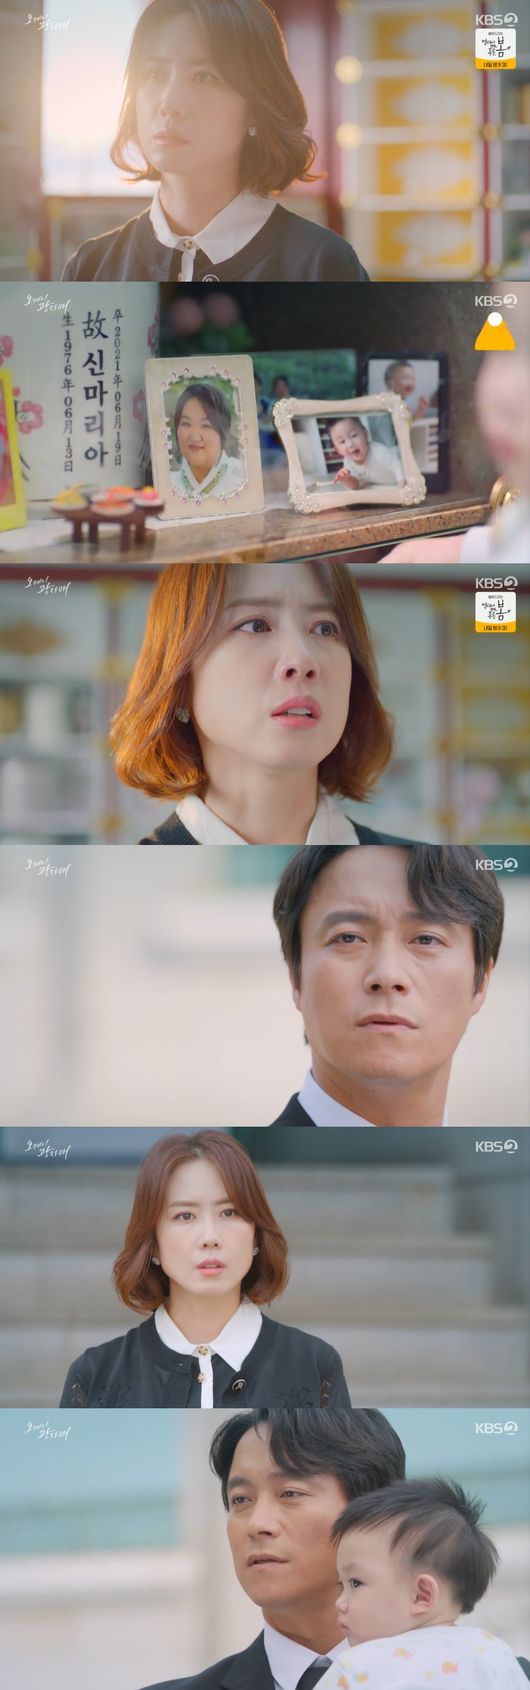 Ko Won-hee in OK Photon sighted Hong Eun Hee getting out of Choi Dae-chul carKBS 2TV weekend drama OK Photon (directed by Lee Jin-seo, playwright Moon Young-nam) aired on the 20th.On this day, Kwang-tae (Ko Won-hee) said, Is it fun to play with people? after learning late that Hung Gi-jin (Seok Jeong-hwan) is a gold spoon.I was a person to see for a lifetime, and you were the first woman to treat me as it is, said Hung Gi-jin. I was convinced that I could see you all my life. I should have said it before this.But Gwangtae turned around saying, I did not even know I was tested, do not show up in front of me again, fraud.However, Kwang Tae was alone and shouted, I am glad that the people and buildings have come together at once, Lee Kwang Tae, finally suffering.As my dad said, I was a first-class lottery, he told Sister, Jeon Hye-bin.Gwangsik said, It is strange to build, is it a dream to be in such a house, or a dream to be broken? But Gwangtae said, The world has many miracles that we can not know, it will not wake up.Bae Bang-ho (Choi Dae-chul) took charge of childcare alone after abruptly losing Mary (Ha Jae-sook).The lawyer who visited the crypt afterwards said, I am sorry and thank you, we will raise our beak well, so do not worry about it, rest comfortably, and I will raise it well.At the same time, in the same building, Gwangnam (Hong Eun Hee) also visited his ashes.Gwangnam turned around saying, I will never forgive you, then kneel down and forgive me when I meet my father, I will not come again, today is the last.At this time, Gwangnam and the defense came across by chance. Gwangnam told the defense, Do you have a mother?He said, Suddenly, on the day of the trip, and told Mary that she was suddenly killed.Two people who came closer later, and when Gwang-tae witnessed Gwang-nam getting out of the defense car, he shouted, This is a wind, an affair, a woman.Bongja (Lee Bo-hee) was moved by telling Gwang-sik (Jeon Hye-bin) that he went to pick Wedding Dress together and soon said, I wanted to show you the first happy figure.Gwangsik gave up the son Yesul (Kim Kyung-nam) of Dose (Lee Byung-joon) for the baton, so he said, I must be happy to my share.When I arrived, I saw the sewing in the wedding dress and said, It took 35 years to wear the Wedding Dress, I am sorry that I was too late. Tears also shed tears that witnessed the love of the two people.OK Photon Broadcast Screen Capture